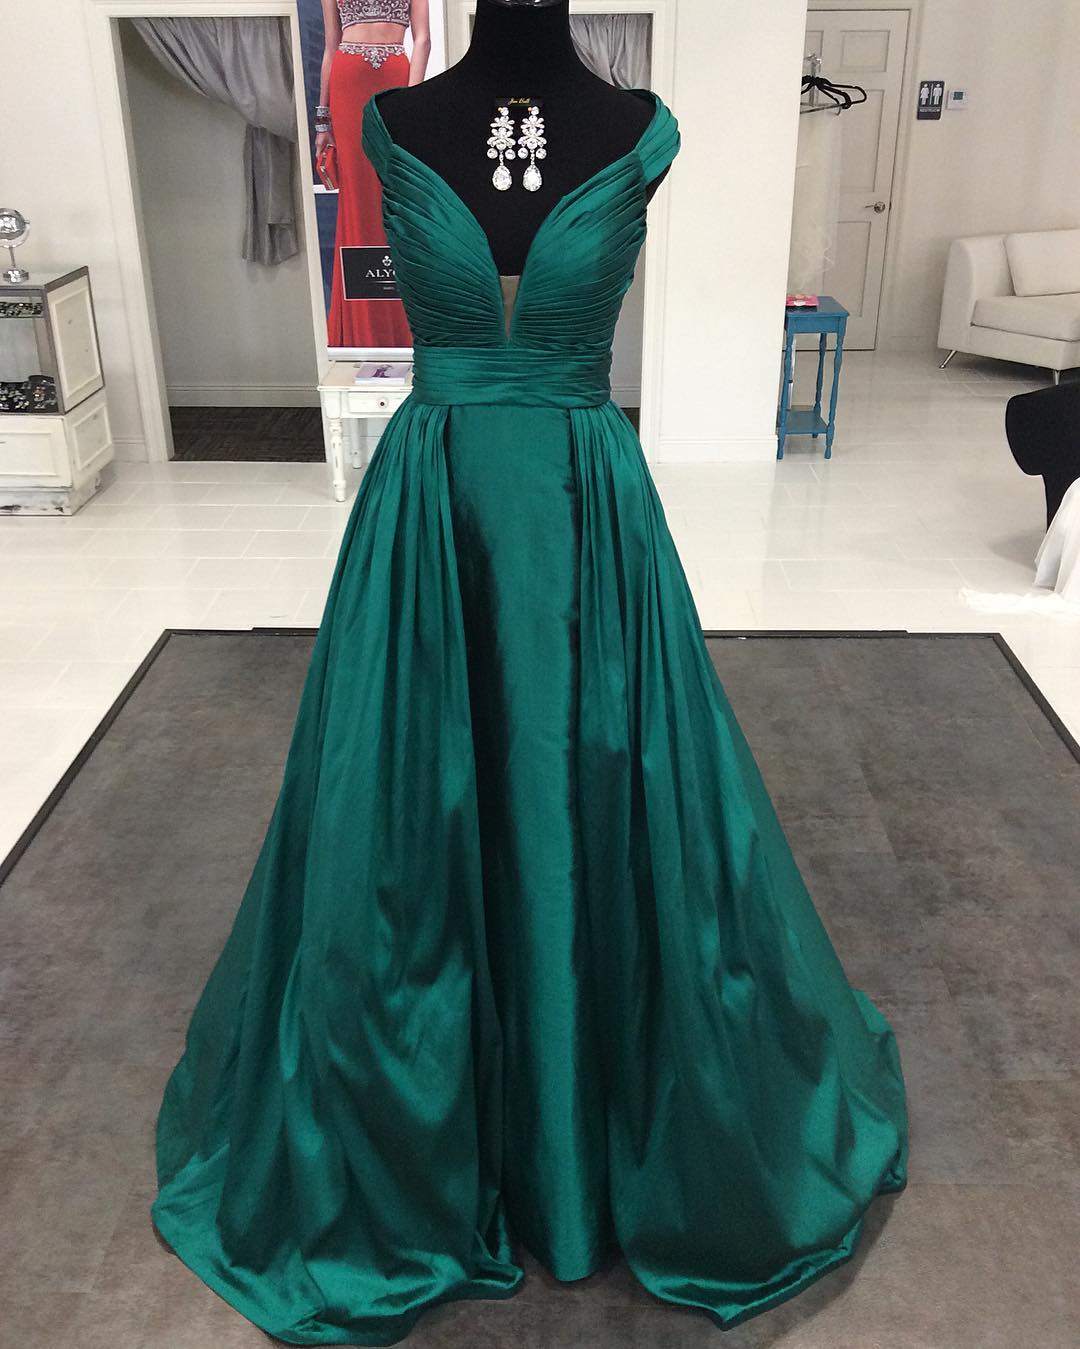 Prom Dresses, Off Shoulder Prom Dresses, Sexy Prom Dresses, A-line Prom Dresses, Long Prom Dresses, Satin Party Dresses, Long Evening